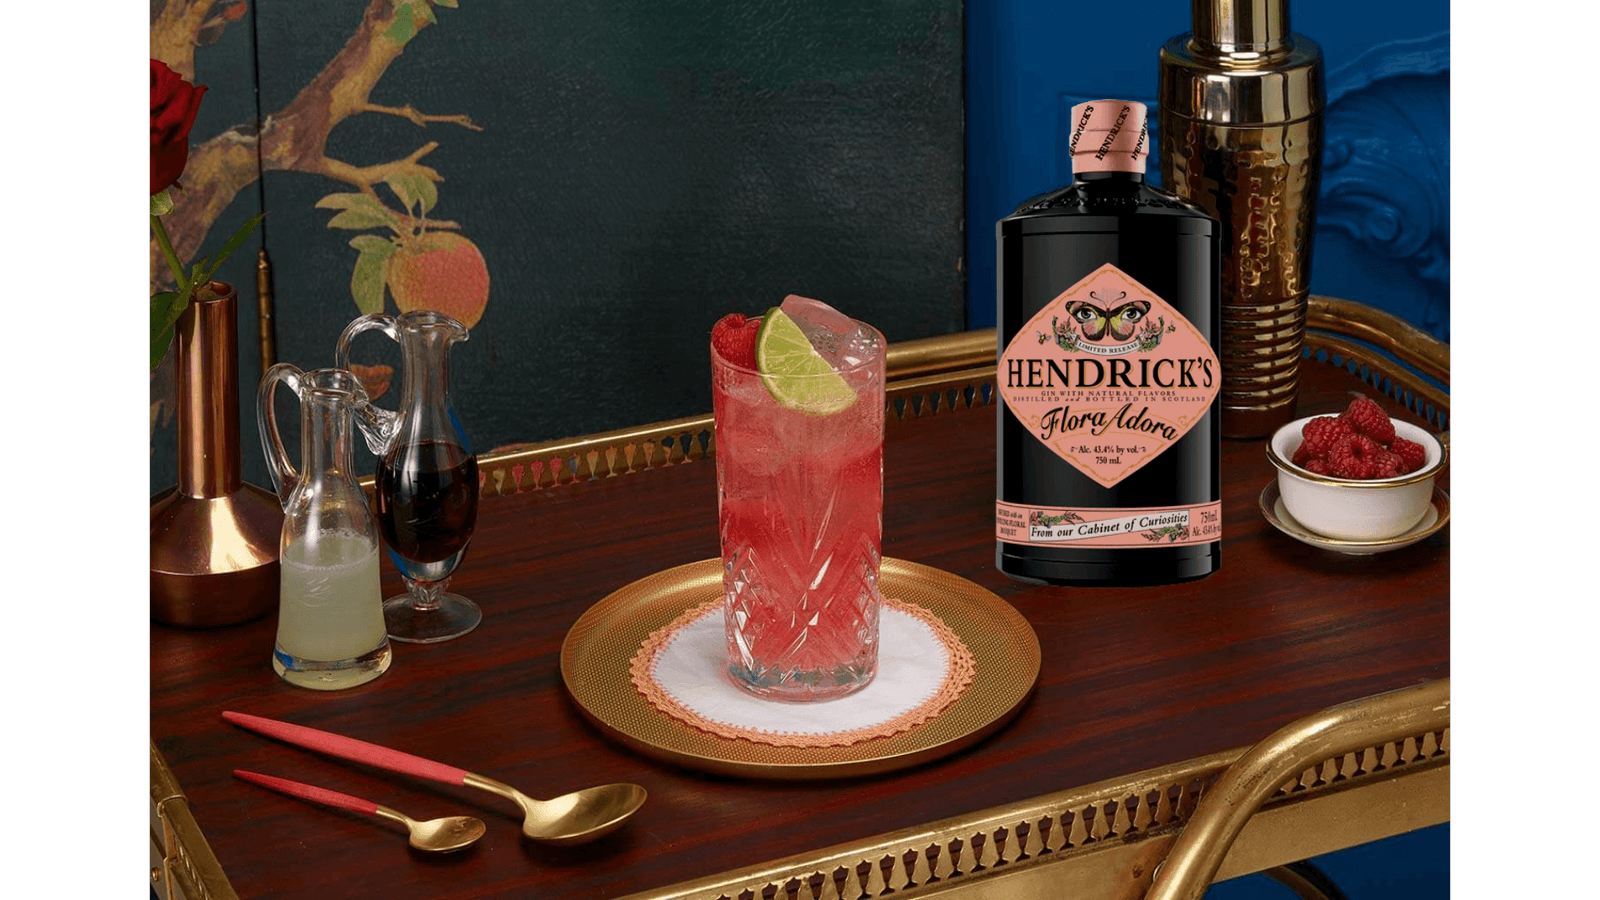 Hendrick's Flora Adora Gin: A Botanical Delight for Gin Lovers - The Barrel Tap